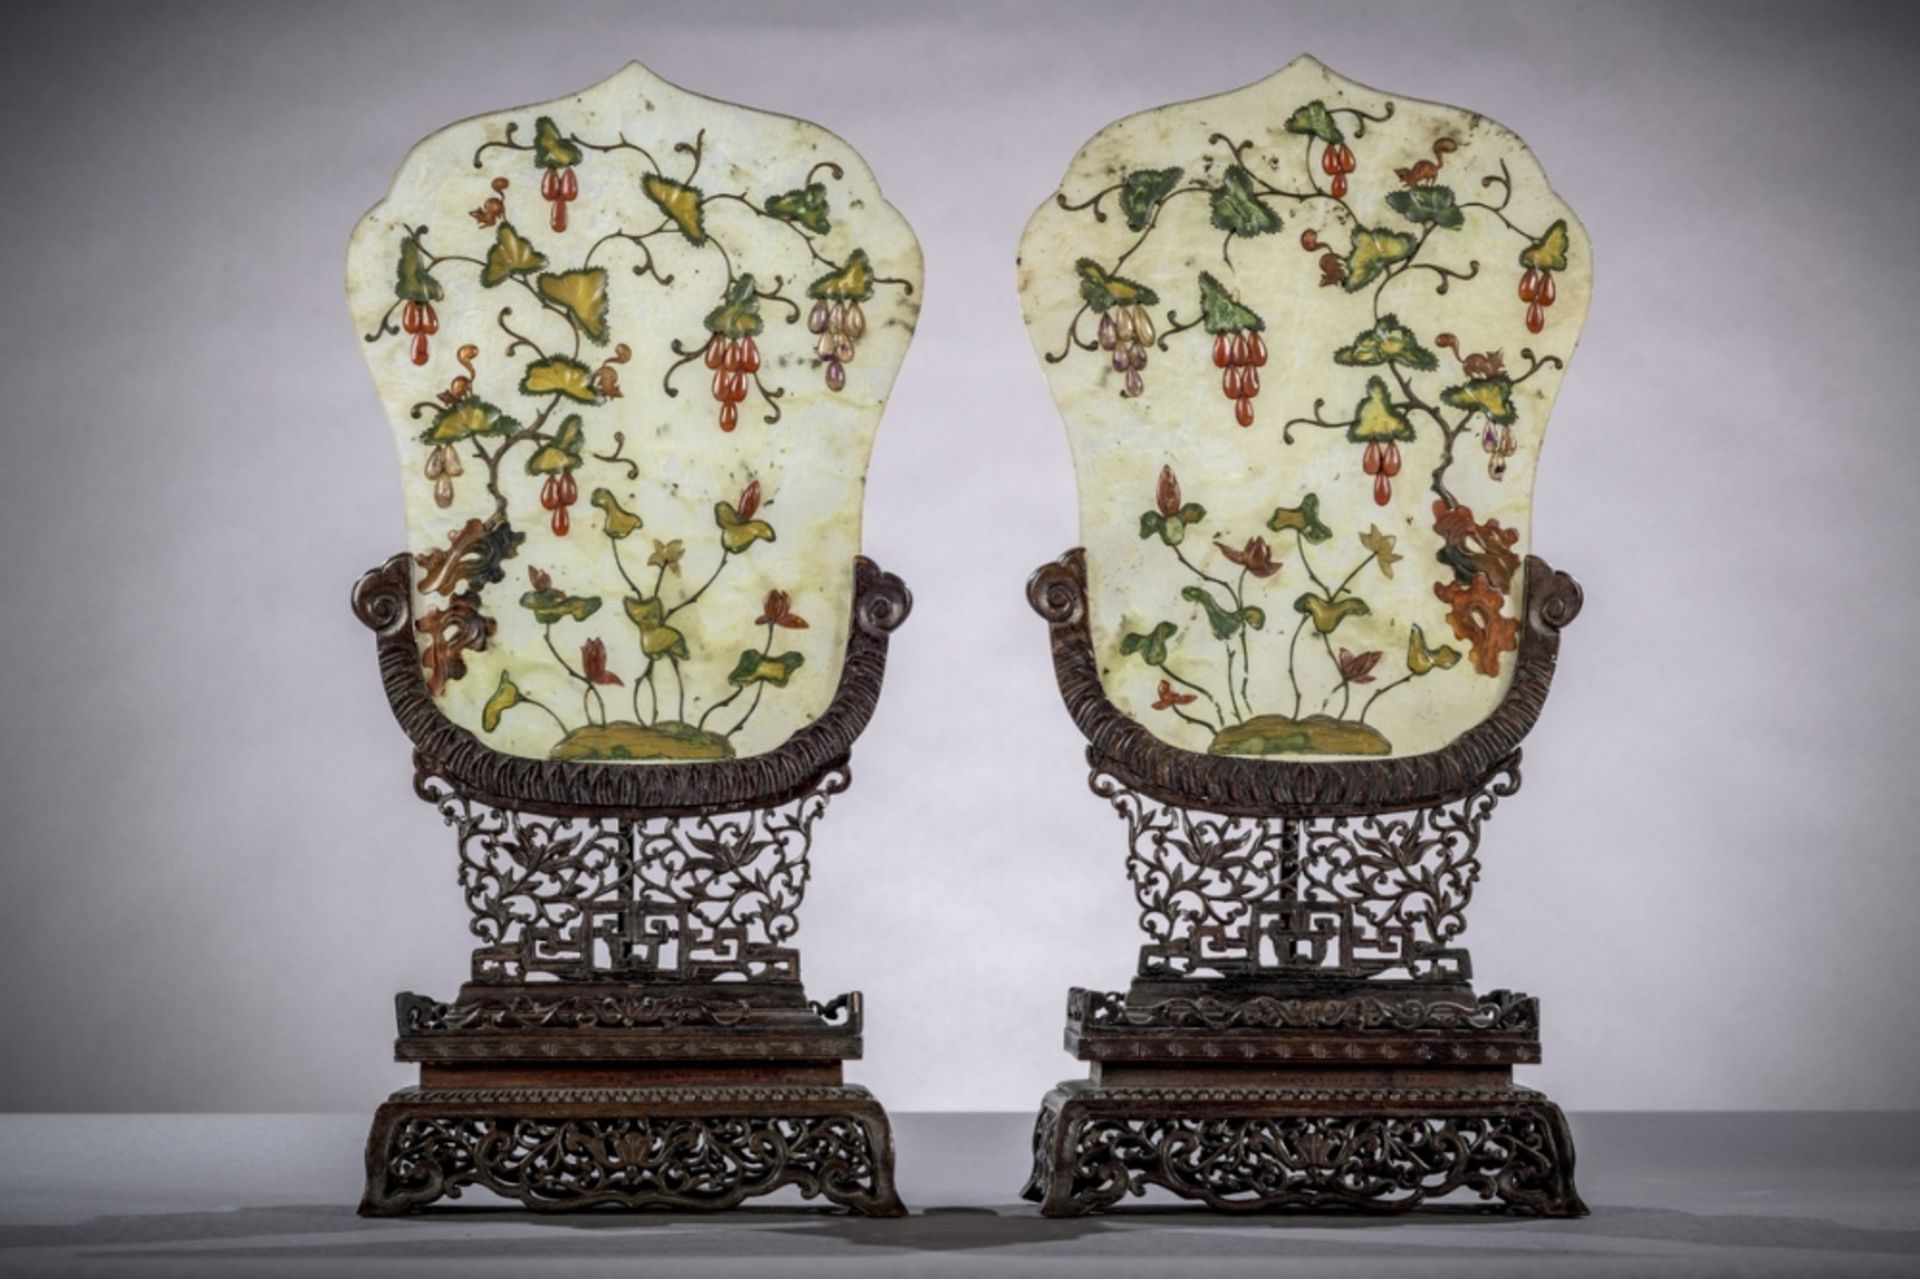 A pair of Chinese table screens with inlaywork on wooden pedestals (44x20x10 cm) (*)